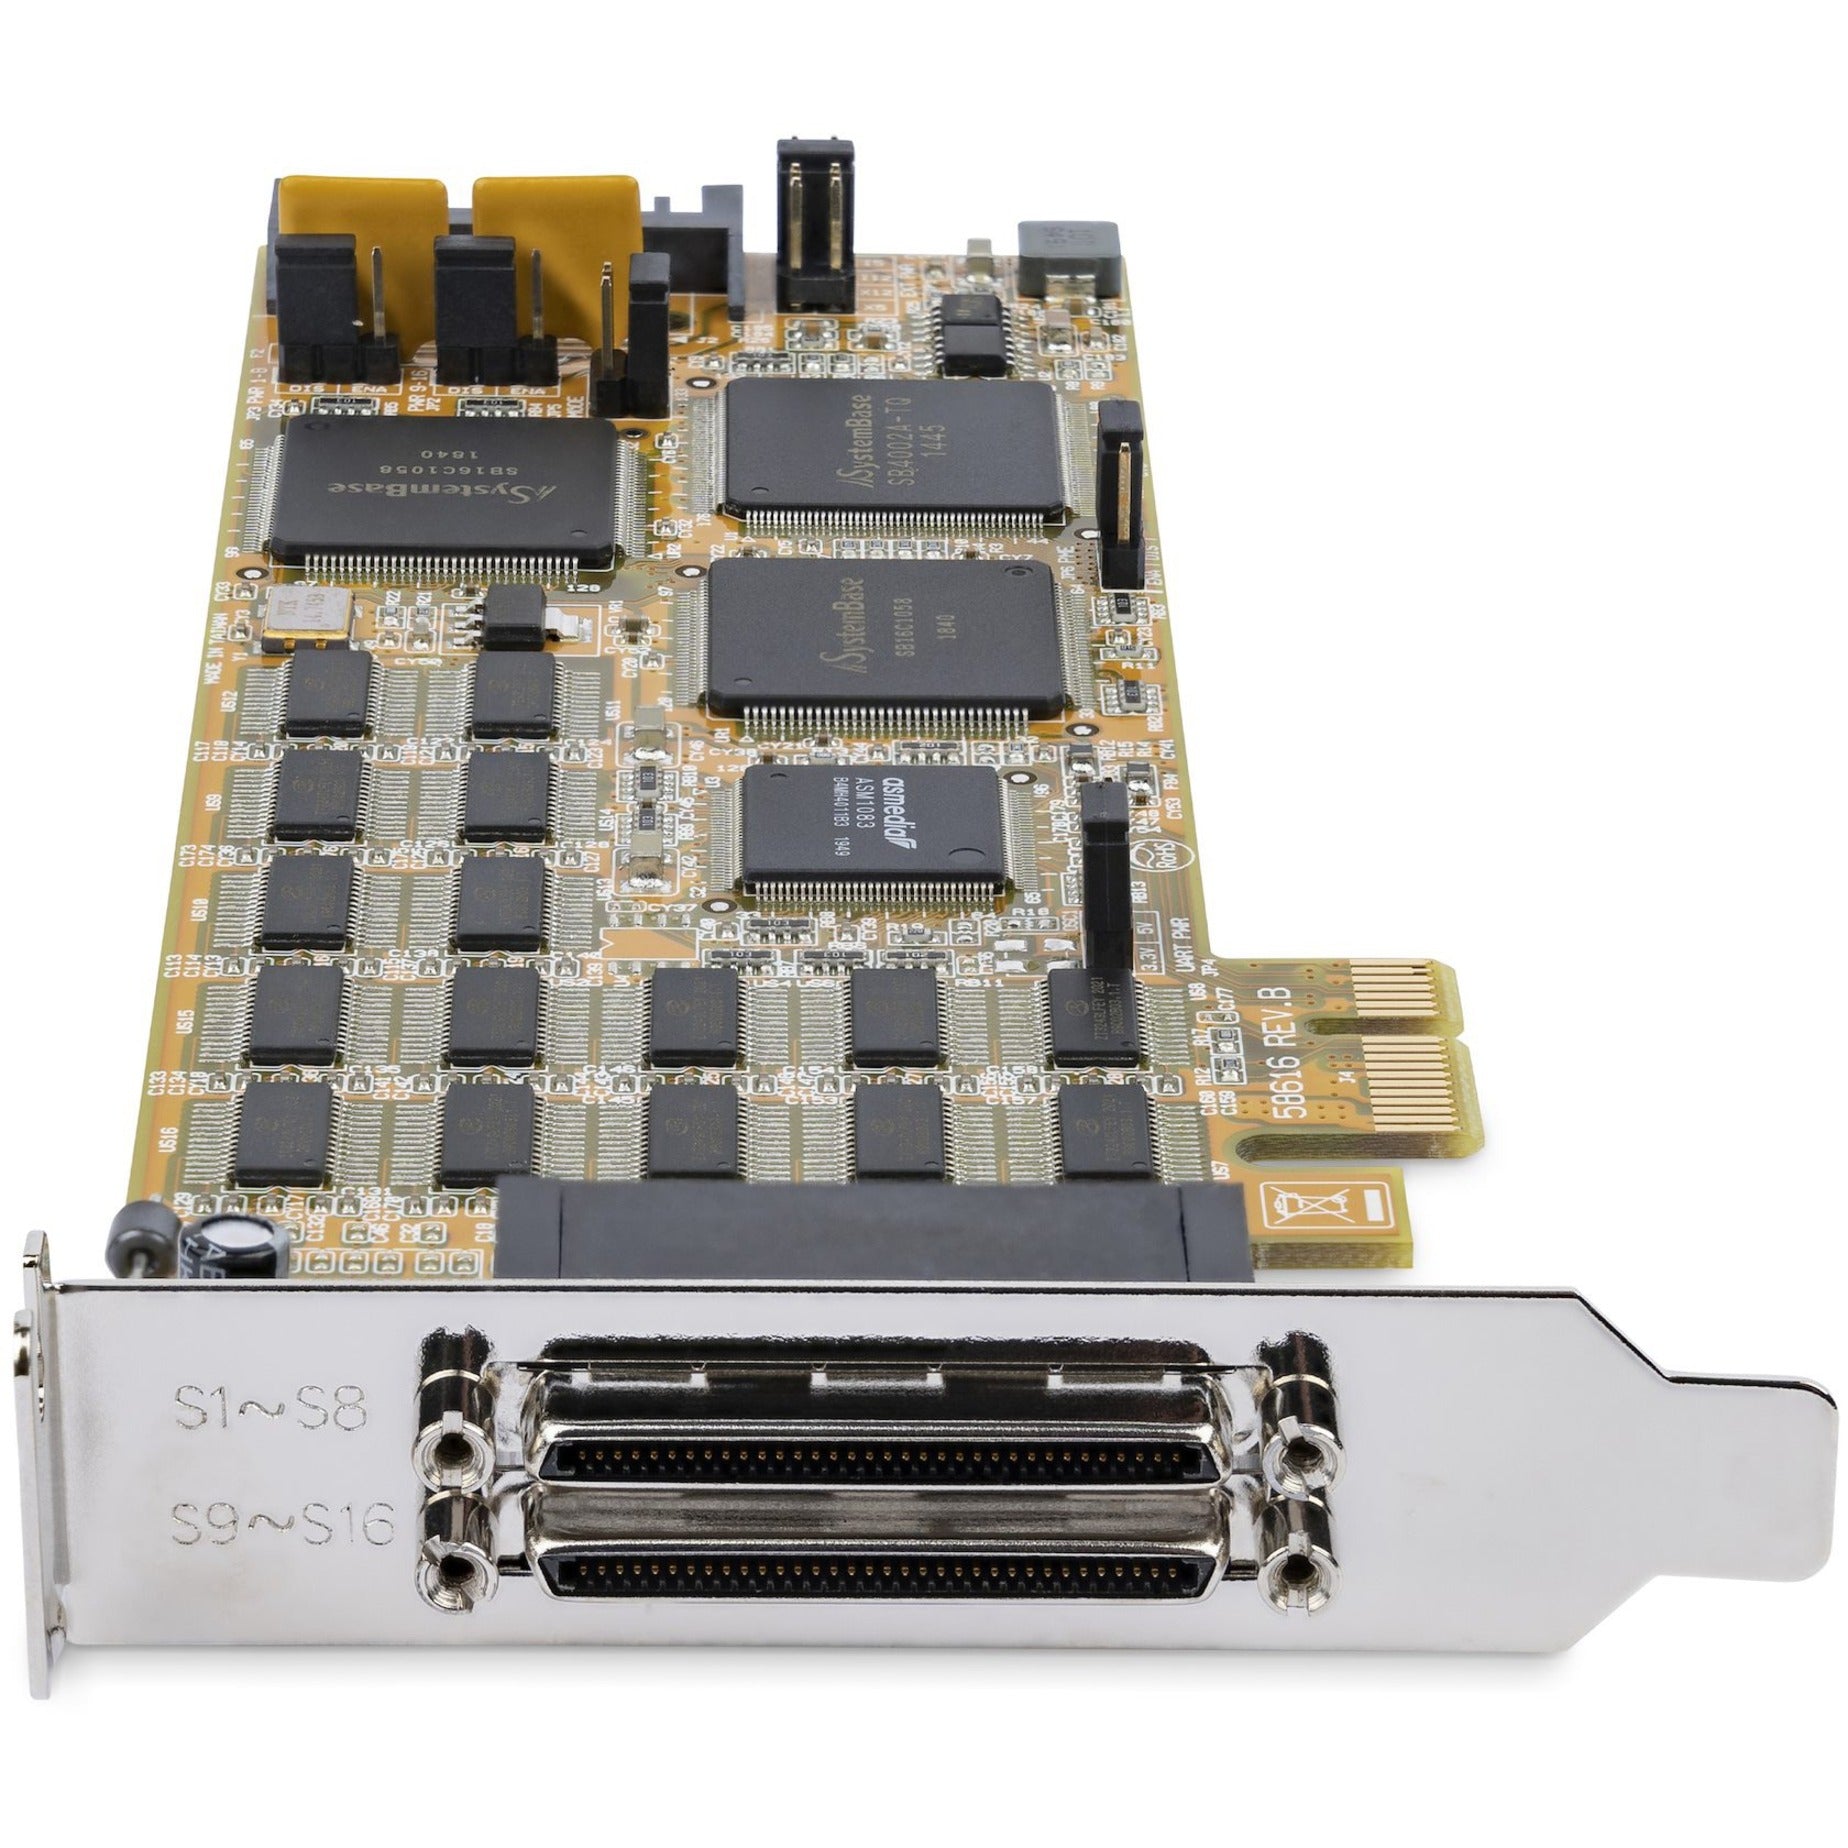 StarTech.com PEX16S550LP 16-Port Low-Profile Serial Card - High-Speed PCIe Serial Card with 16 DB9 RS232 Ports